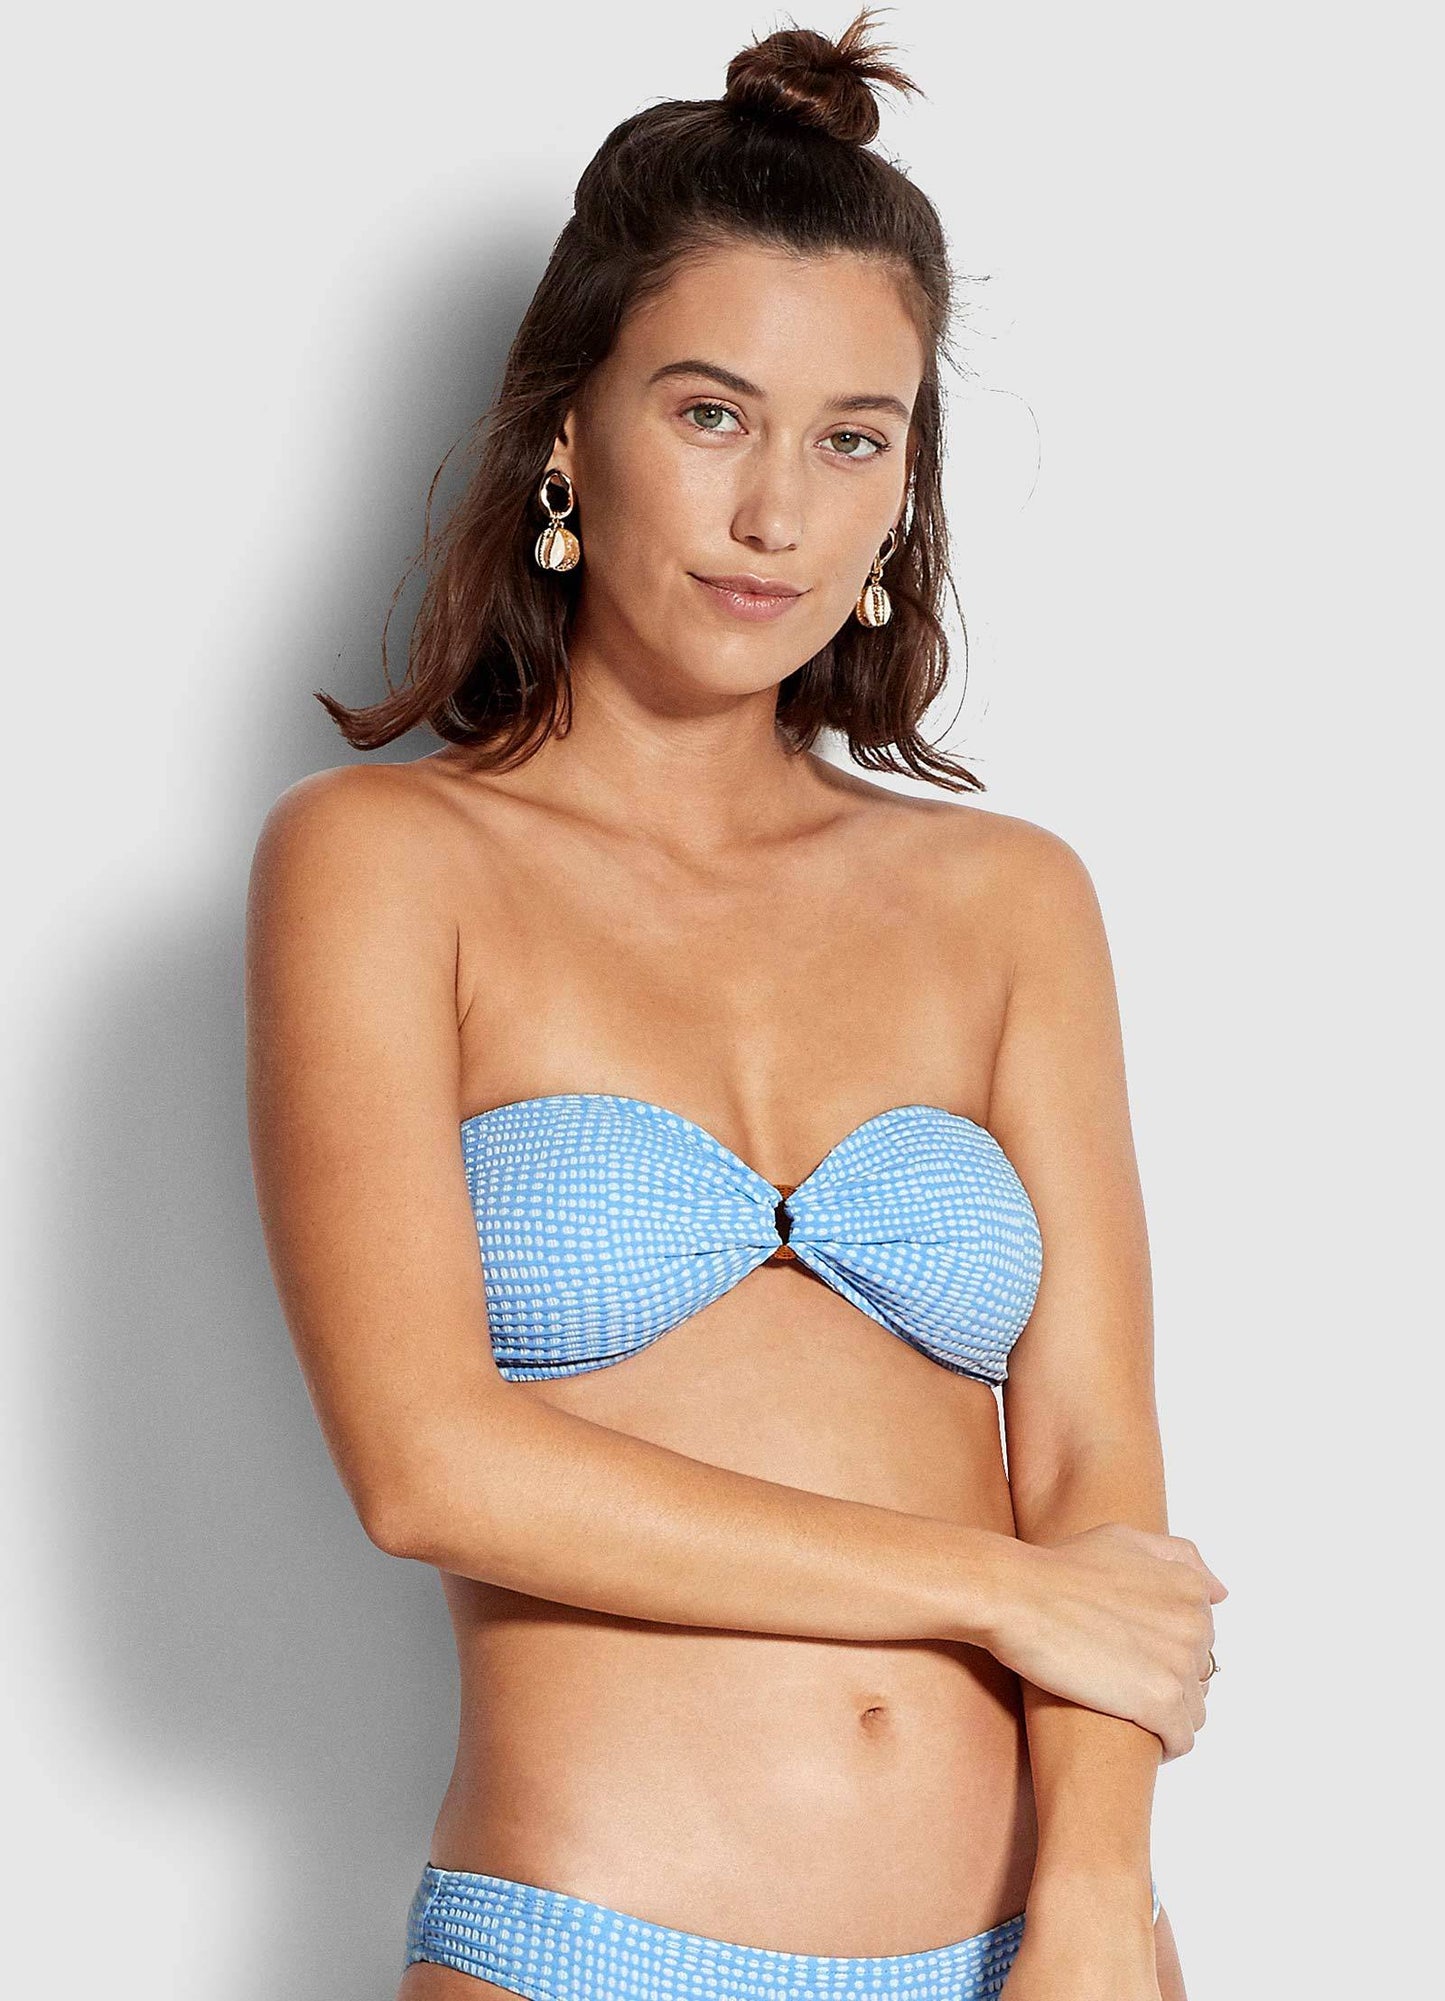 SEAFOLLY - SPOTTED - RING FRONT BANDEAU - POOL BLUE